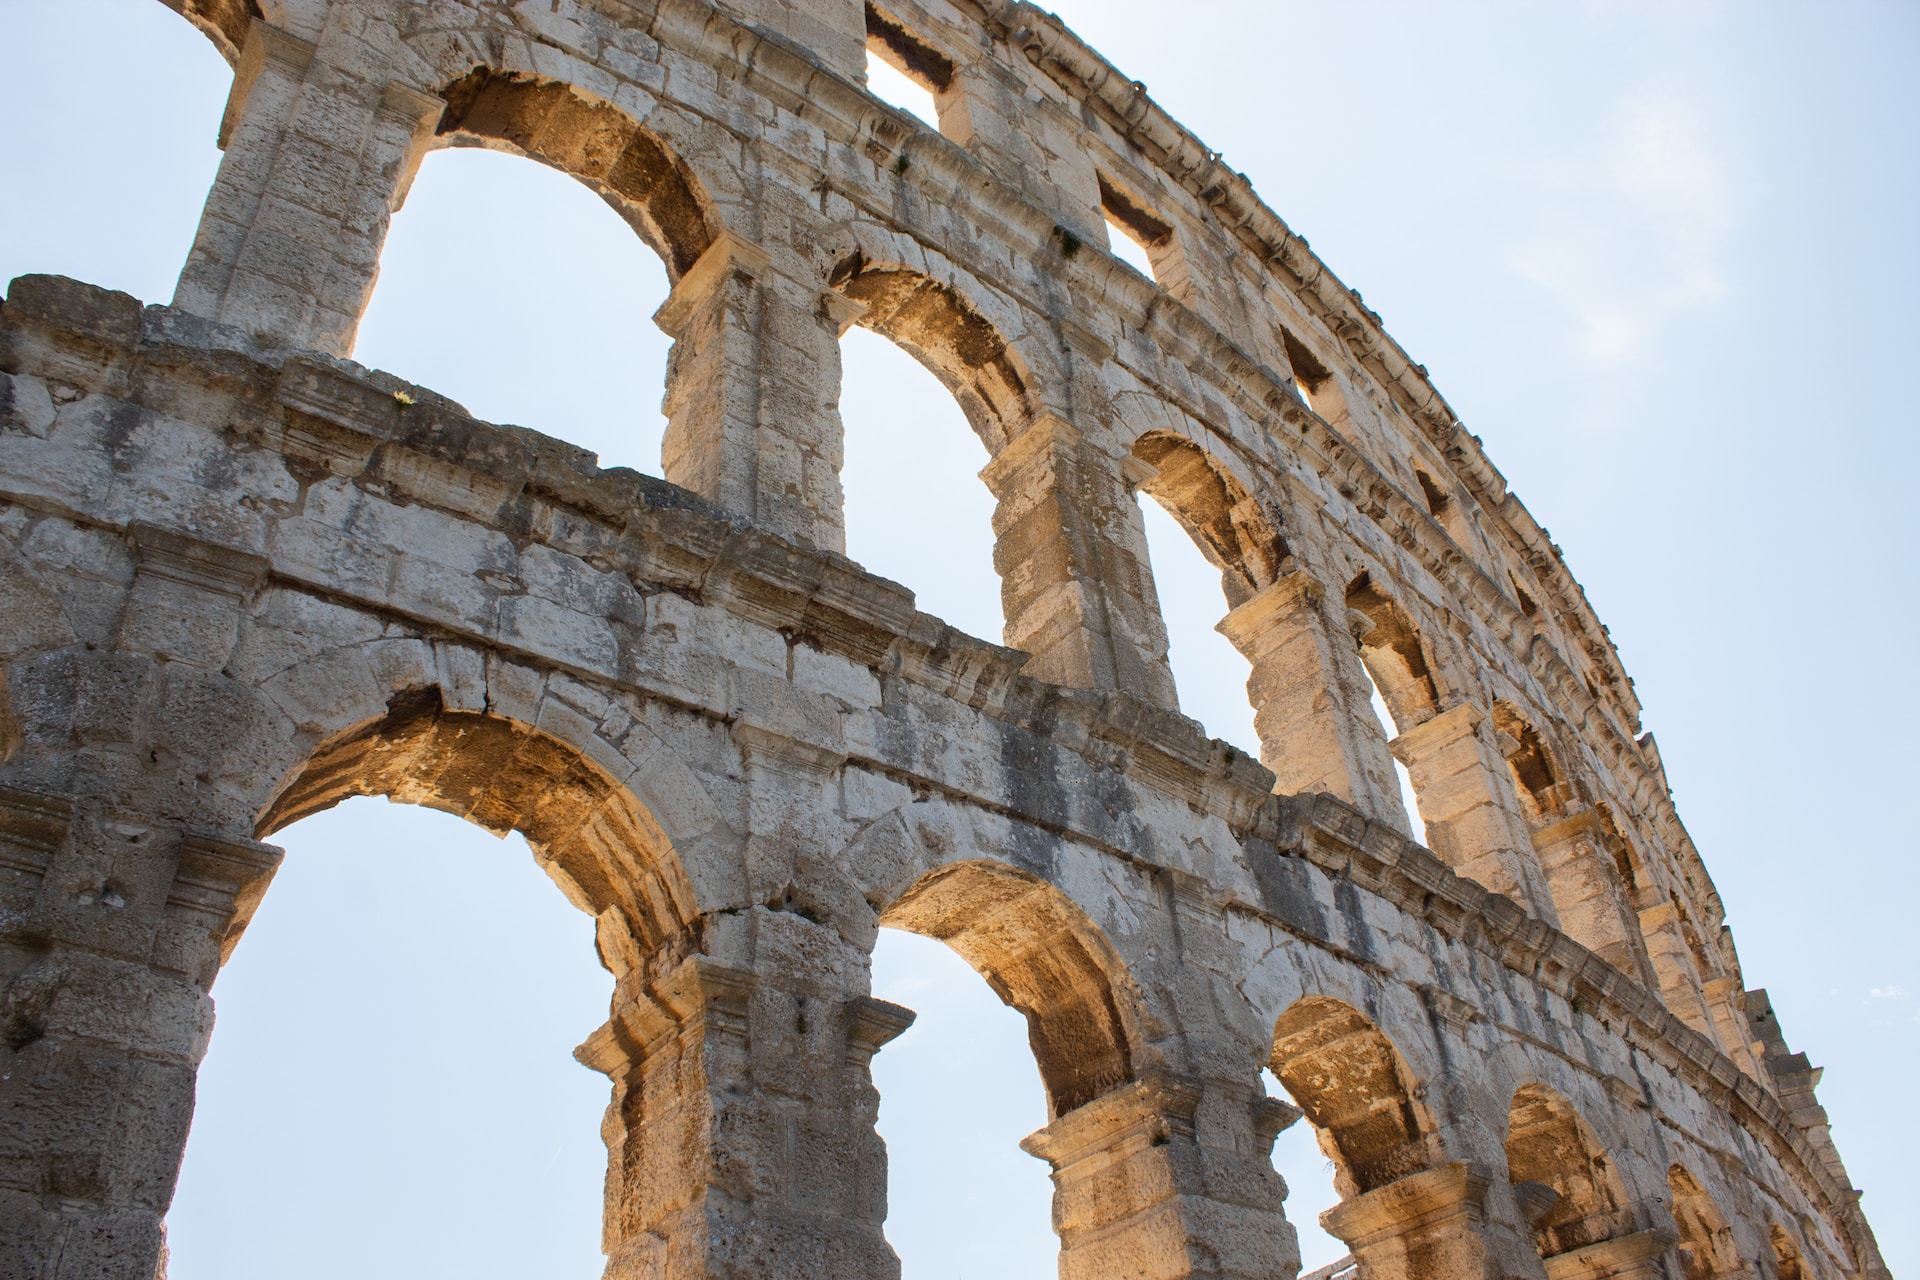 Pula, Croatia, a treasure from the past and a modern delight